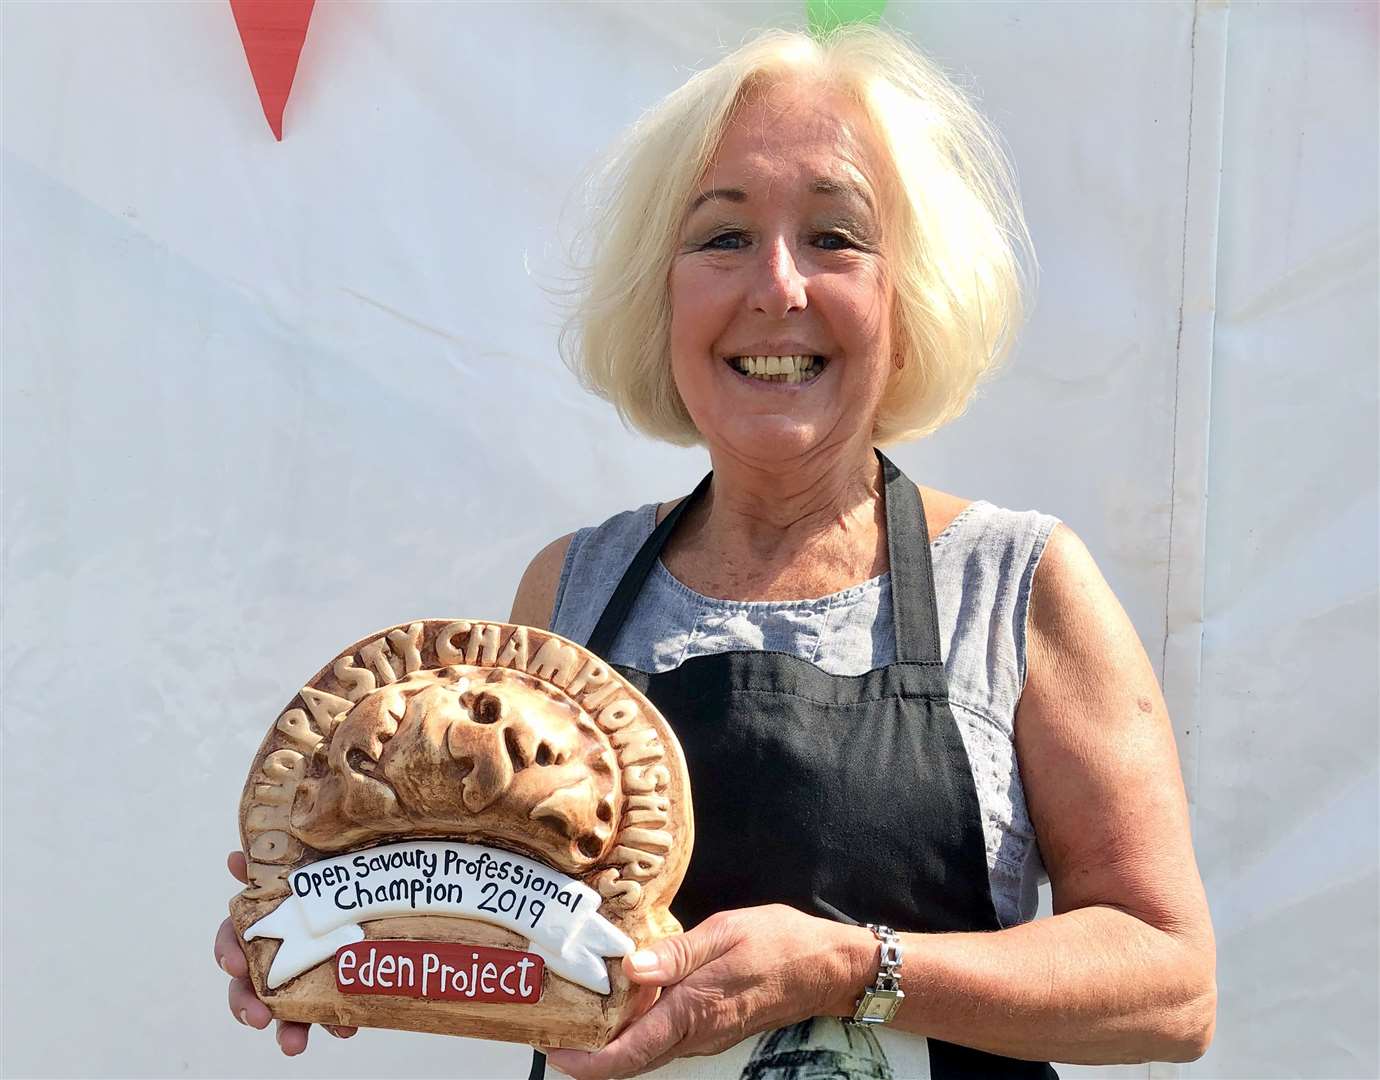 The Big Breakfast Kentish Knocker made up of sausages, egg and bacon won Jill Martin the trophy in 2019